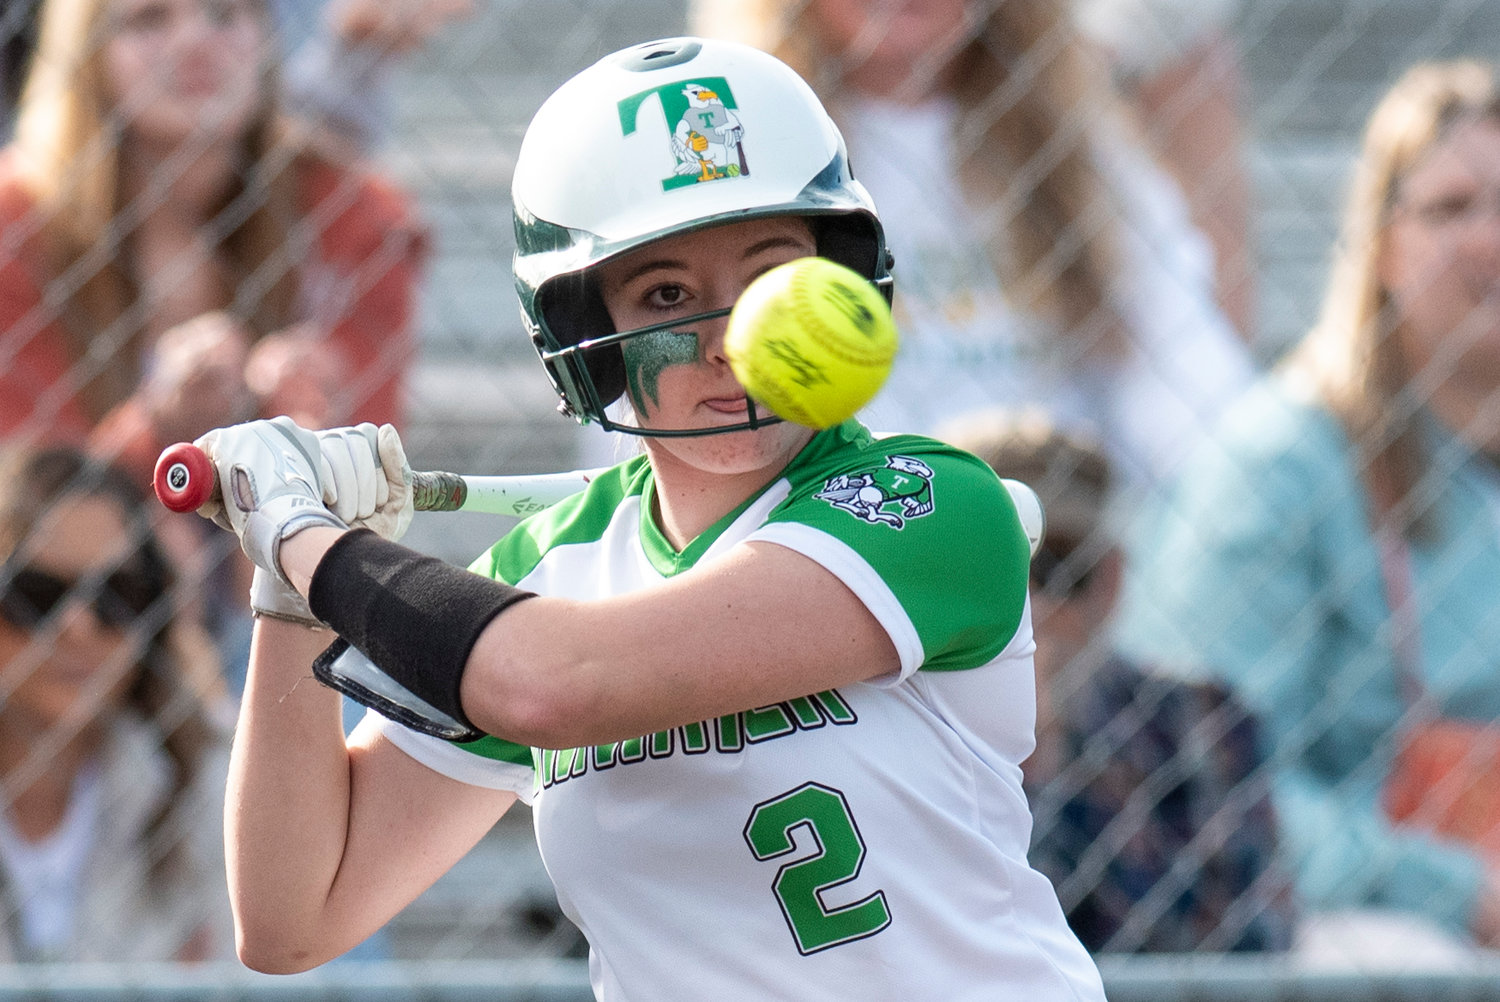 Tumwater's Jaime Haas watches a Black Hills' pitch go by during a plate appearance against the Wolves at home on March 25.